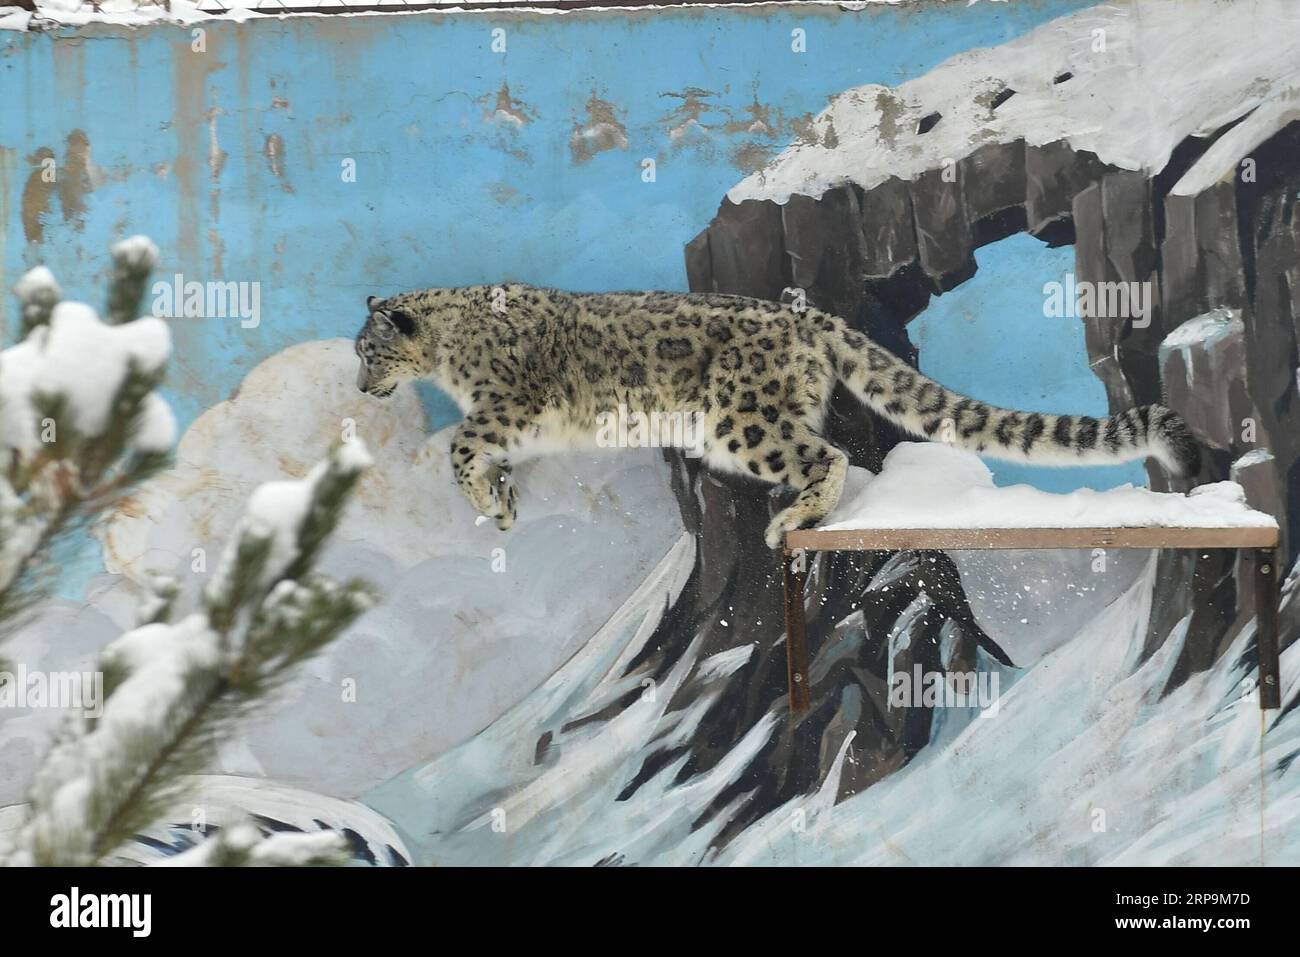 (190411) -- BEIJING, April 11, 2019 (Xinhua) -- A snow leopard jumps in the snow-covered Xining Wildlife Park in Xining, capital of northwest China s Qinghai Province, on Nov. 7, 2018. Li Yuhan can still vividly remember when she encountered snow leopards two years ago at Sanjiangyuan, meaning source for three rivers, in northwest China s Qinghai Province. I was with a scientific survey team, and we were heading toward a mountain top in Namsel Township of Yushu Tibetan Autonomous Prefecture, said Li, a student of Peking University. I saw seven snow leopards on that single day. Li said it was a Stock Photo